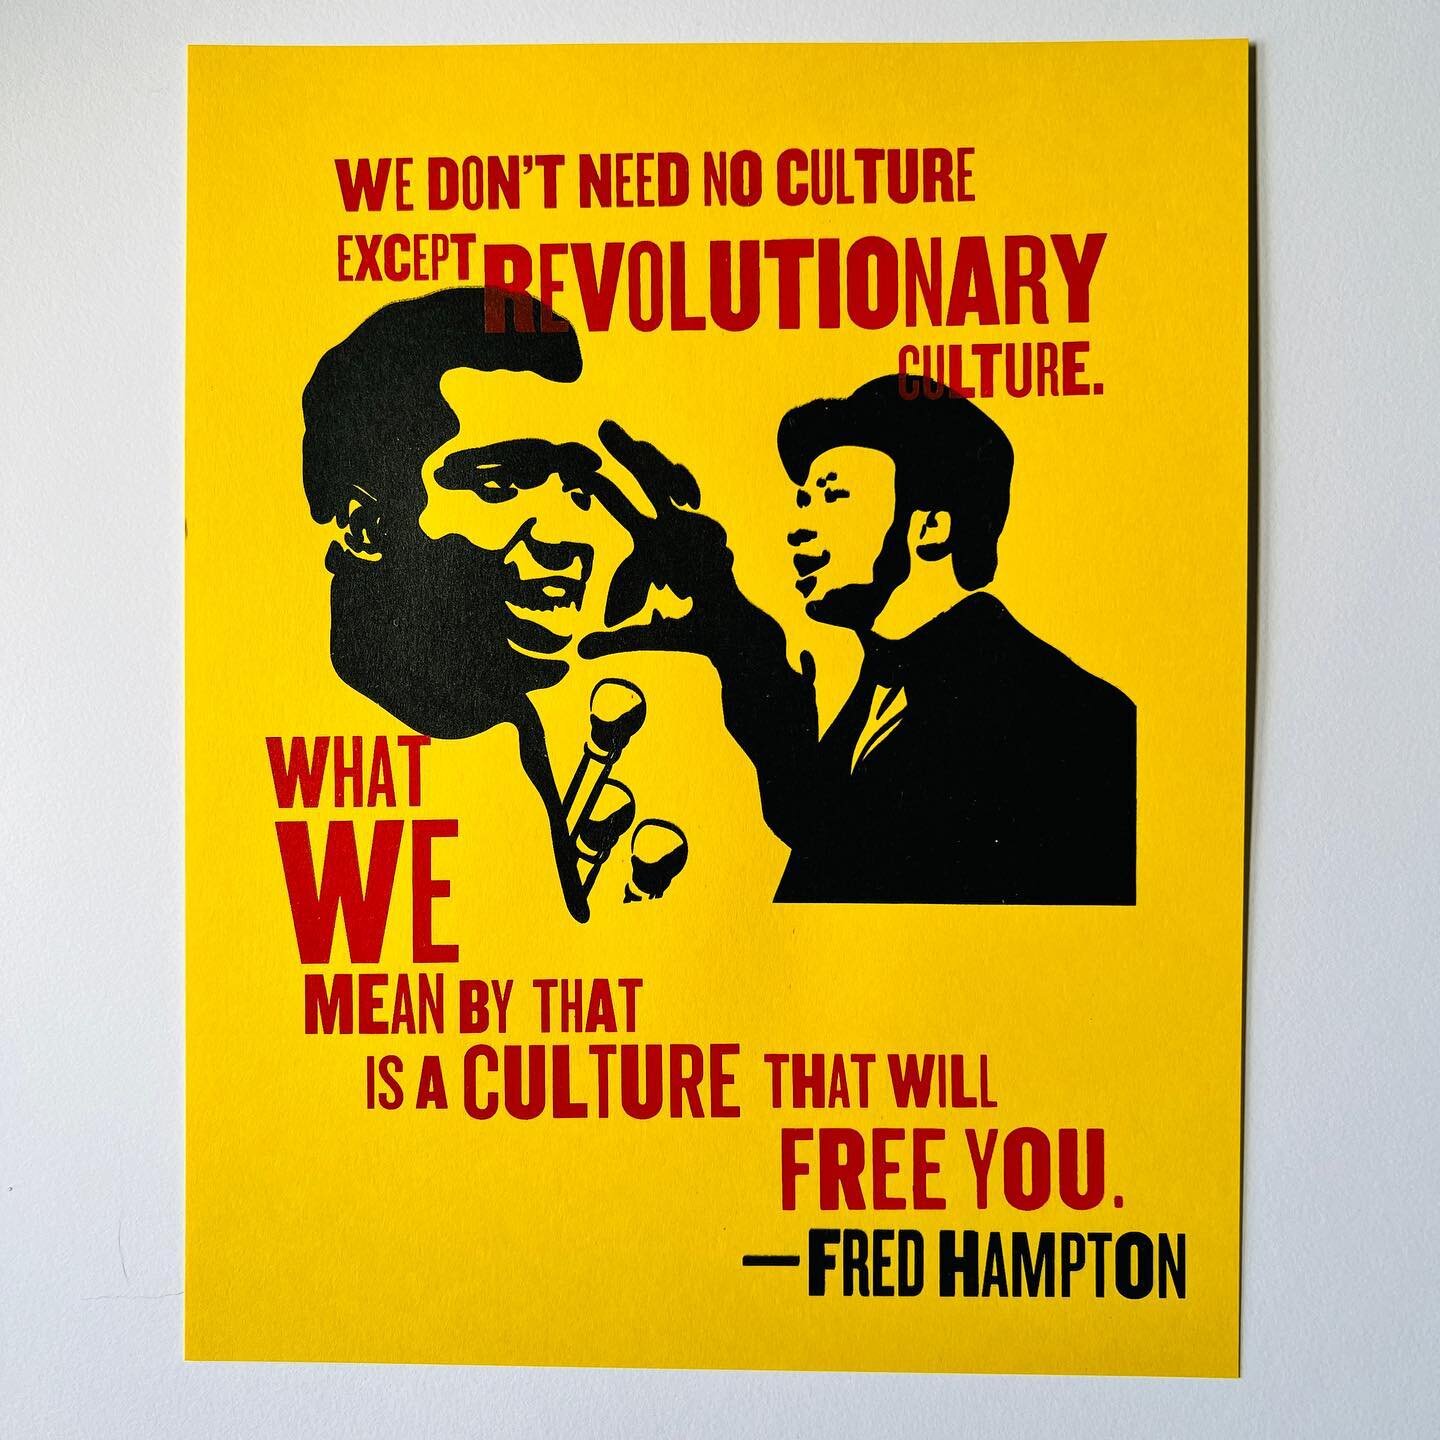 fred hampton said we don&rsquo;t need no culture except revolutionary culture. what we mean by that is culture that will free you. 

sorry y&rsquo;all | NOT FOR SALE | client work 
but working on more prints like these in the future for my own shop w